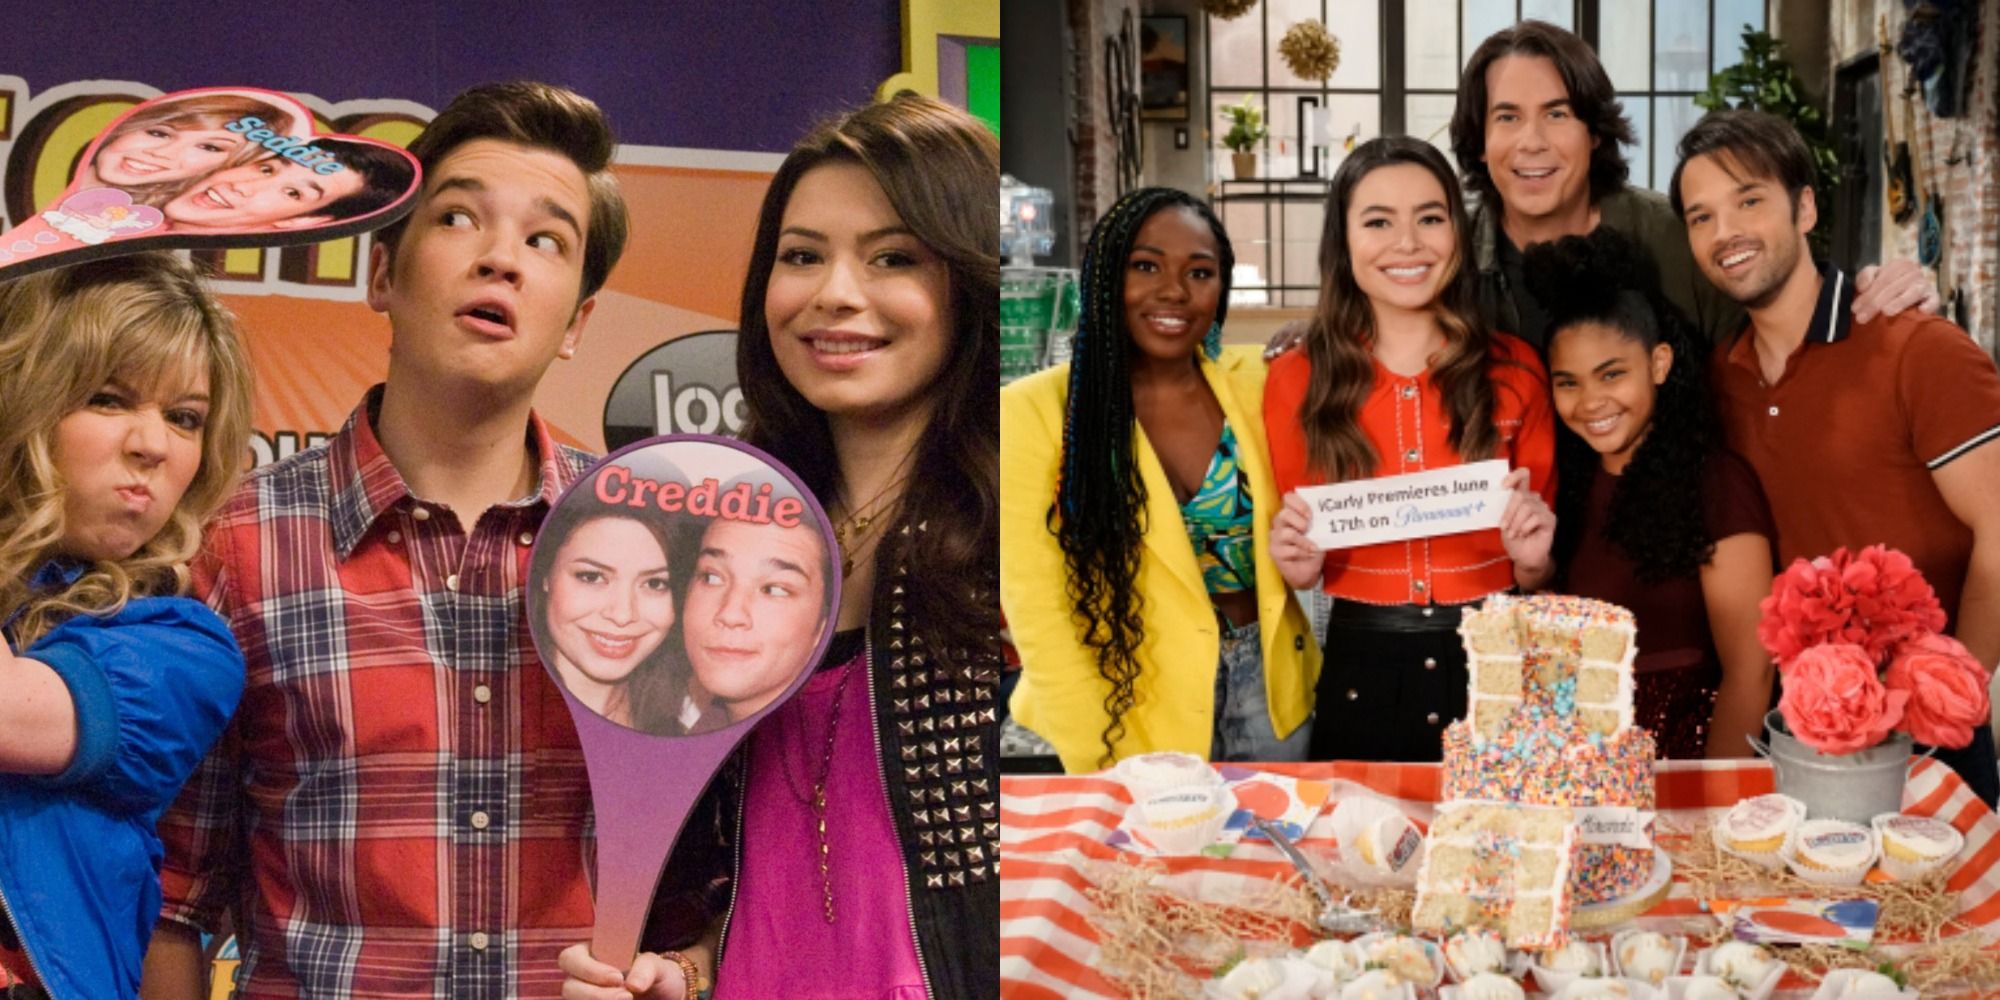 iCarly Reboot Premiere Shared What Happened to Sam Puckett